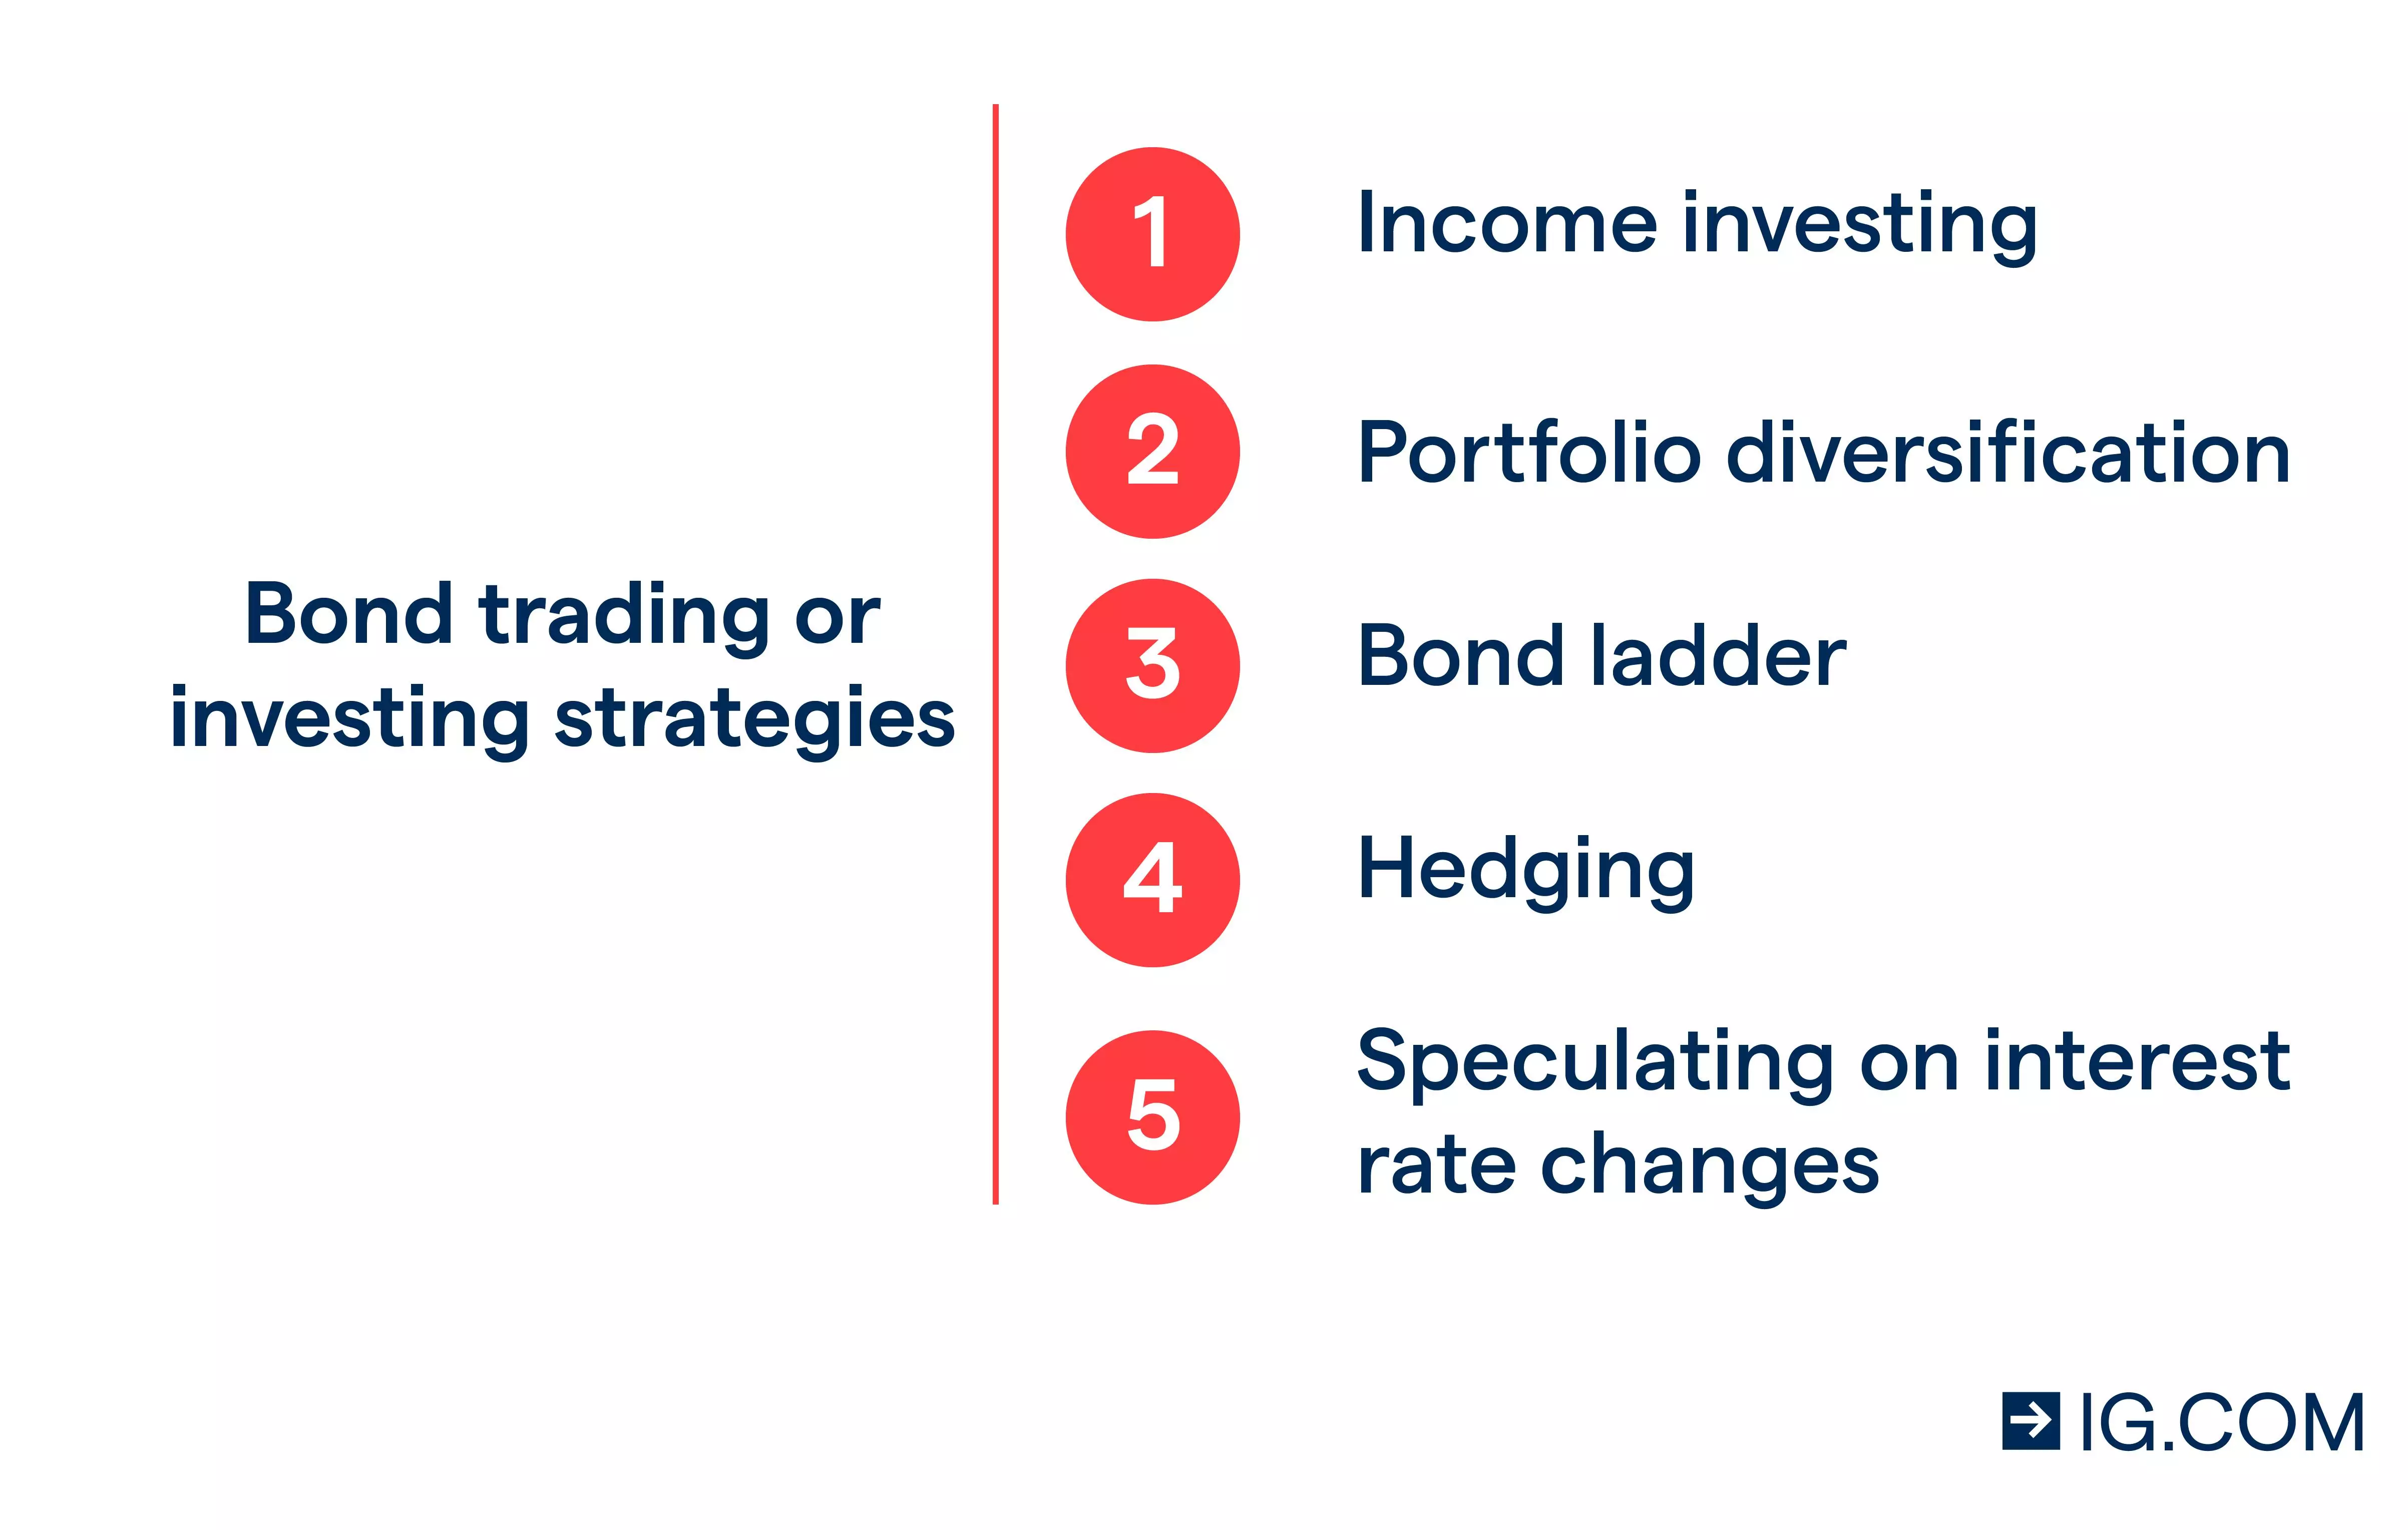 Bond trading and investing strategies